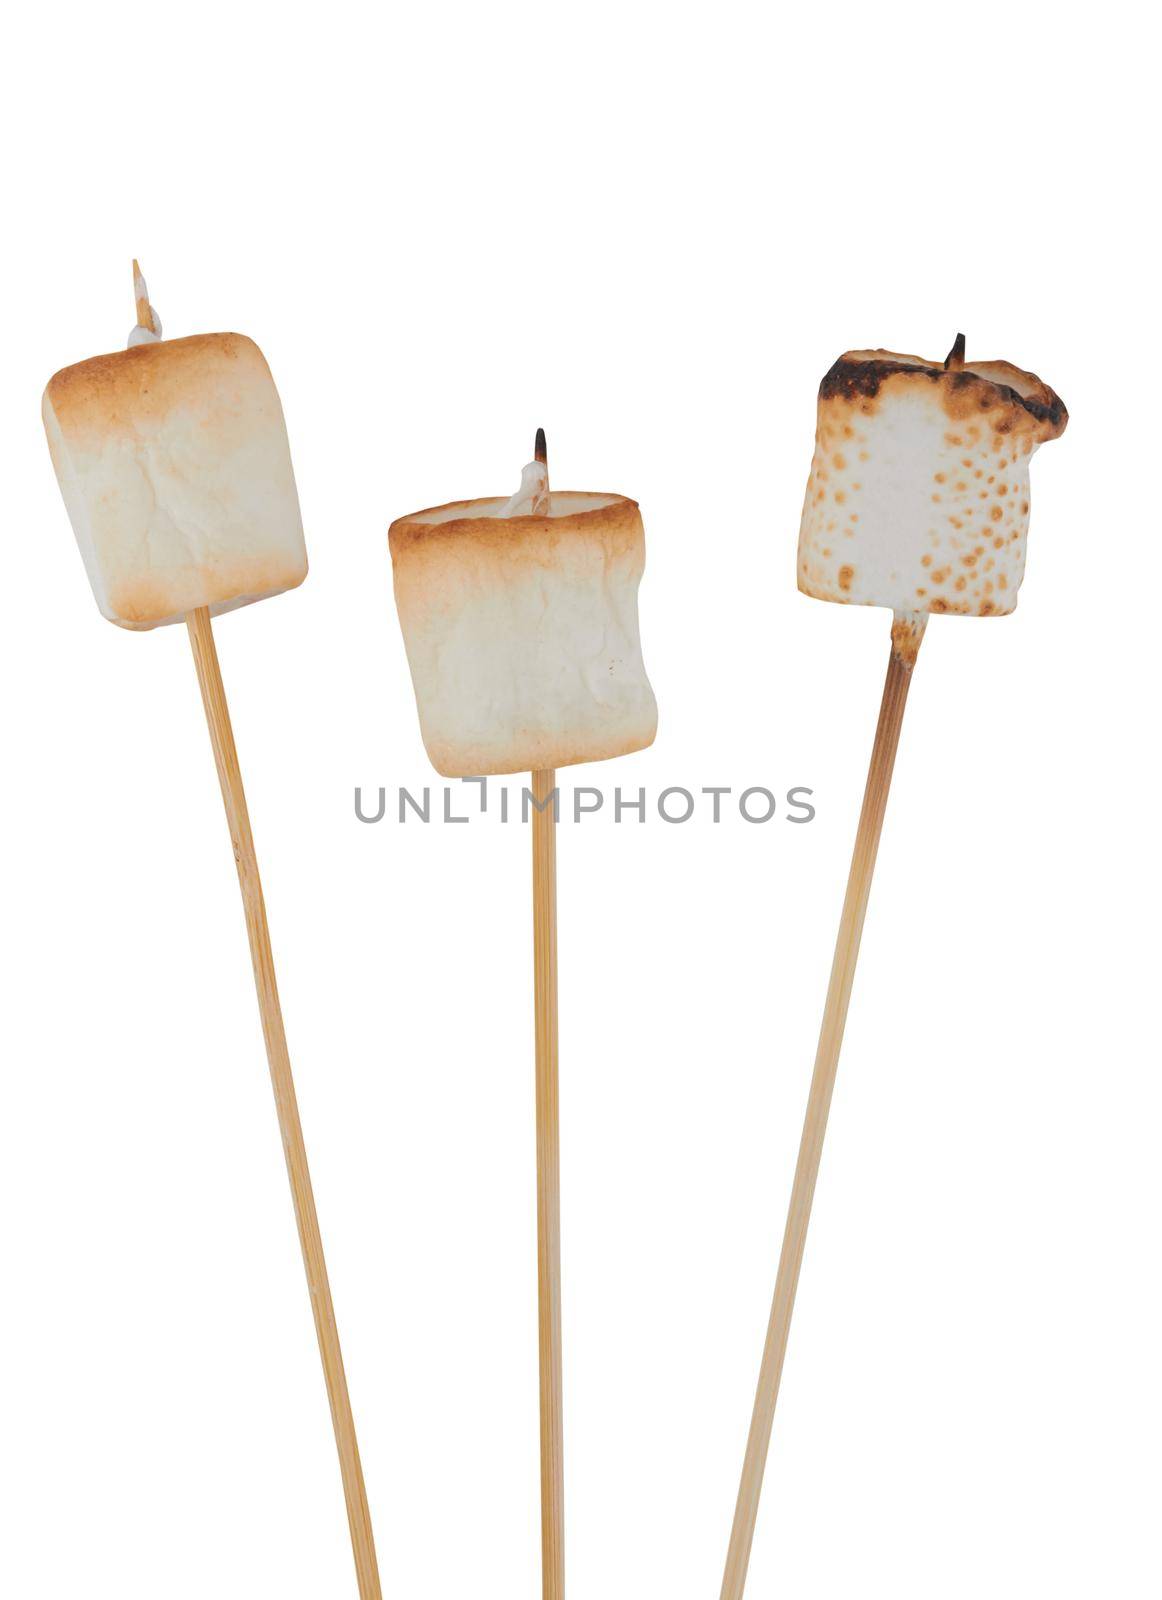 Marshmallow on wooden stick by pioneer111